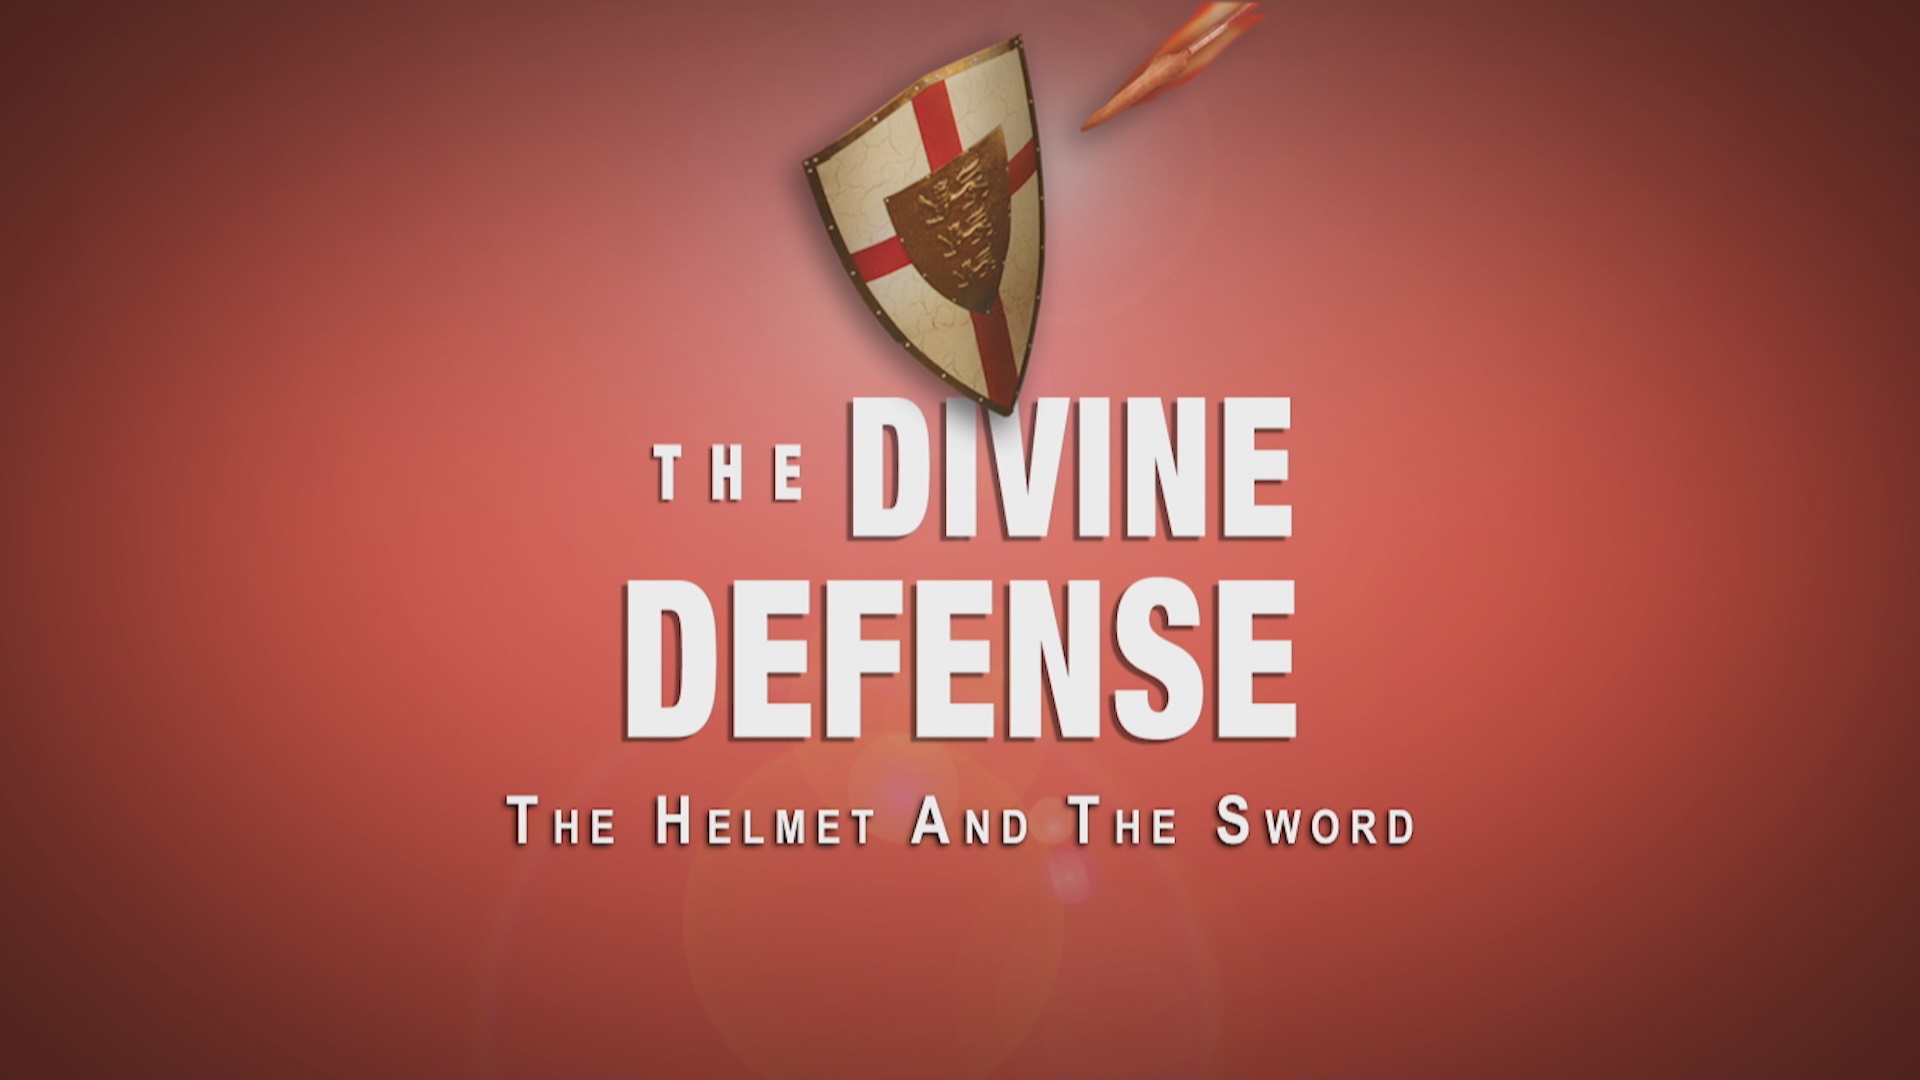 The Helmet and the Sword